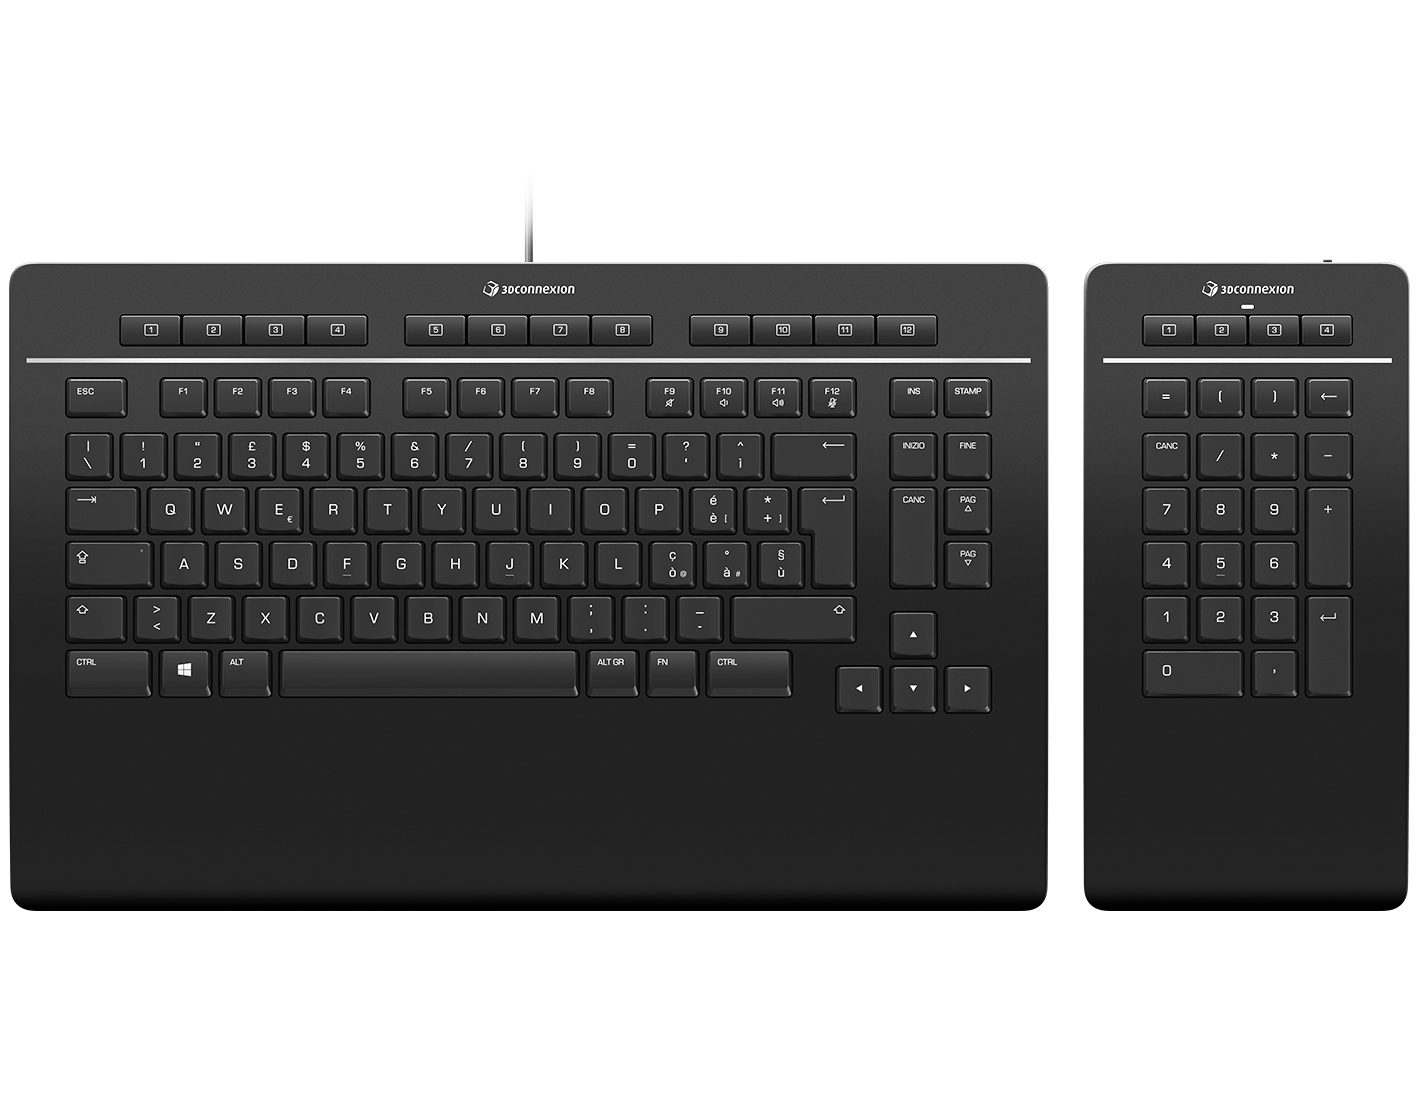 3Dconnexion Keyboard Pro with Numpad, Italiano (QWERTY)